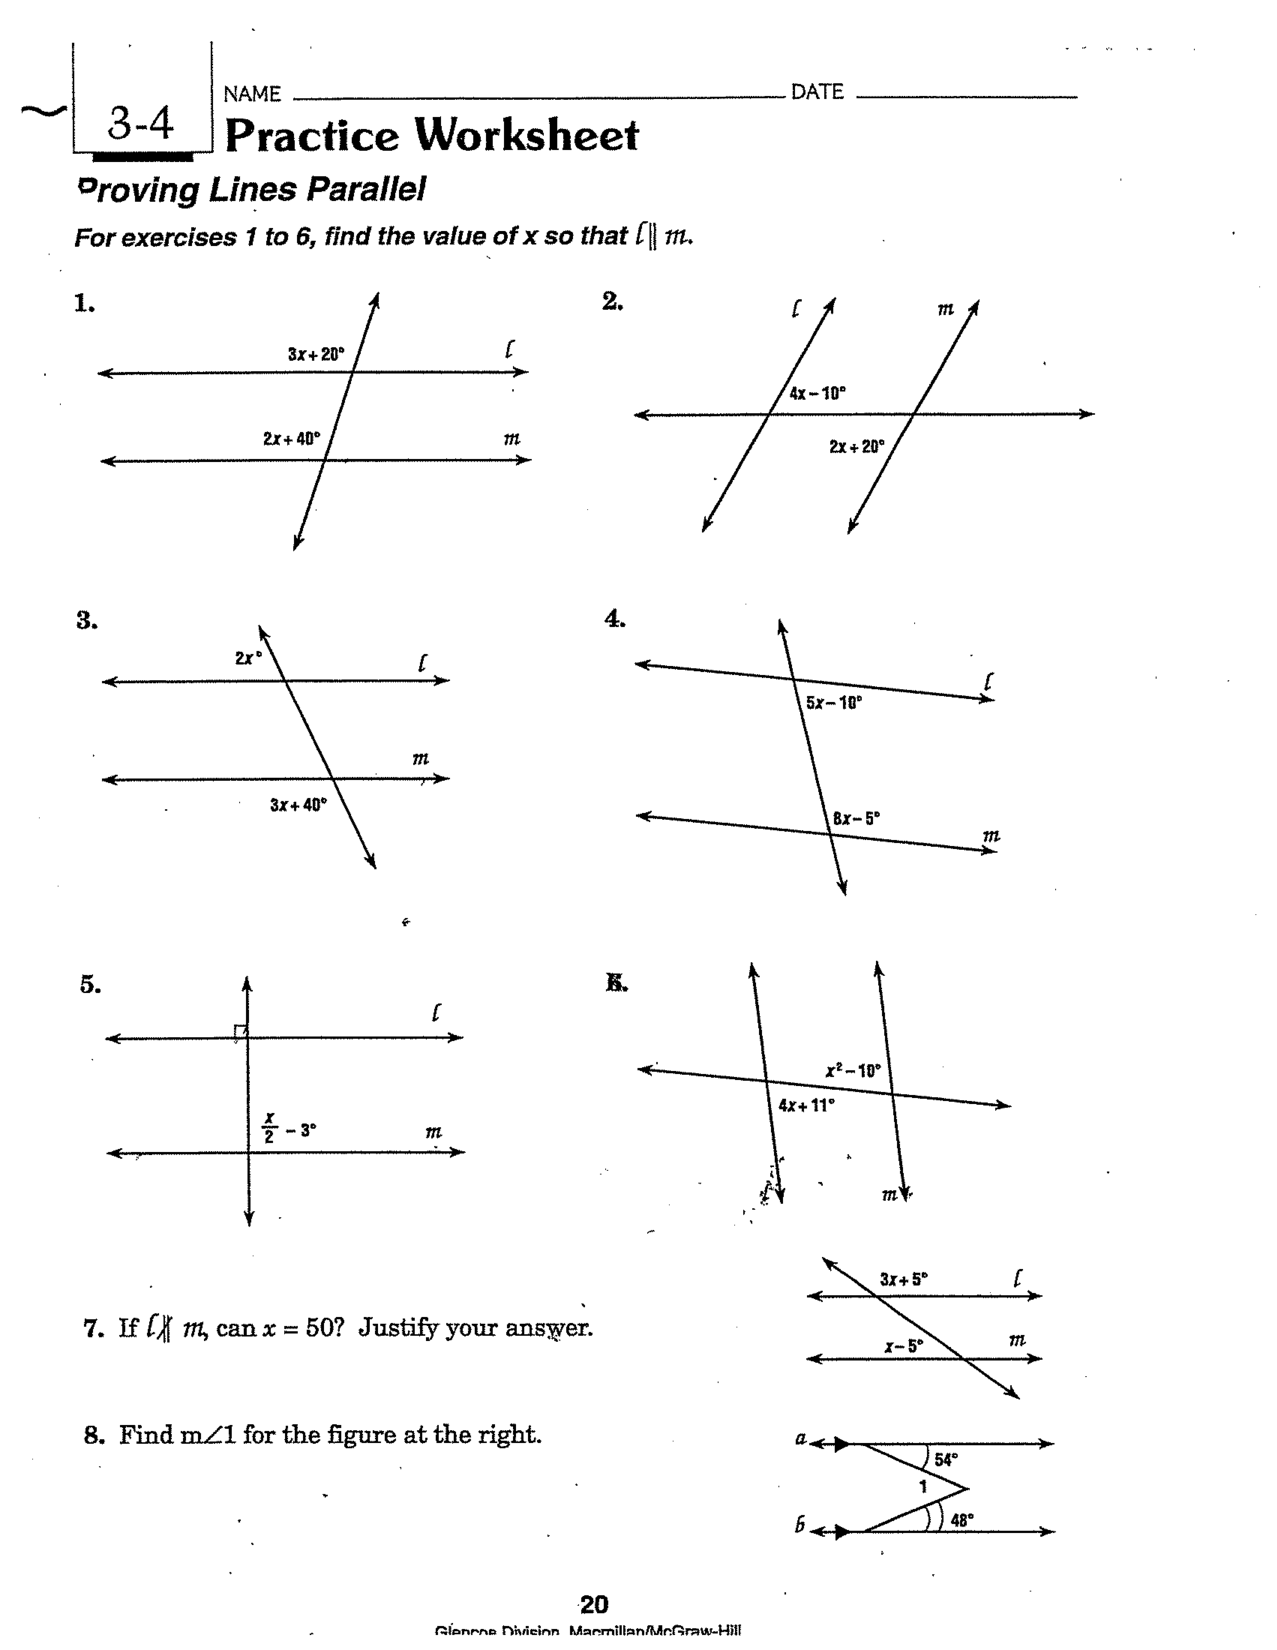 Parallel Lines and Angles Worksheet Image